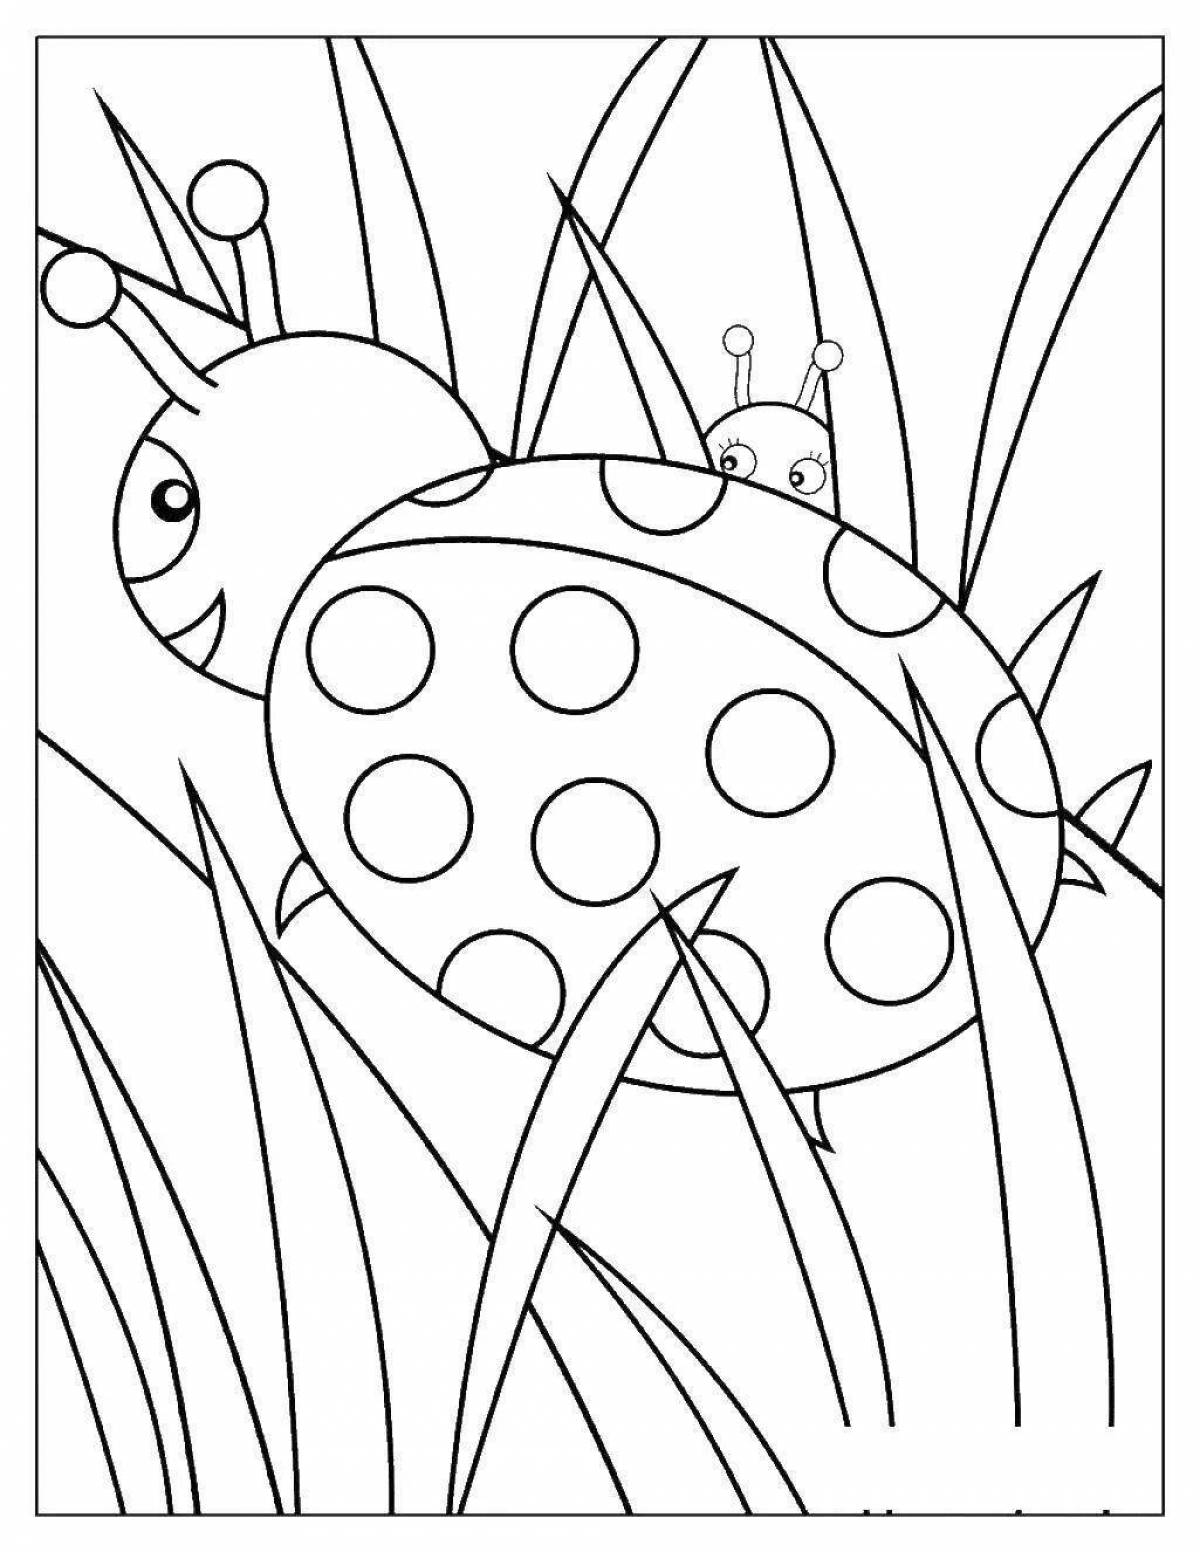 Creative insect coloring pages for 3-4 year olds